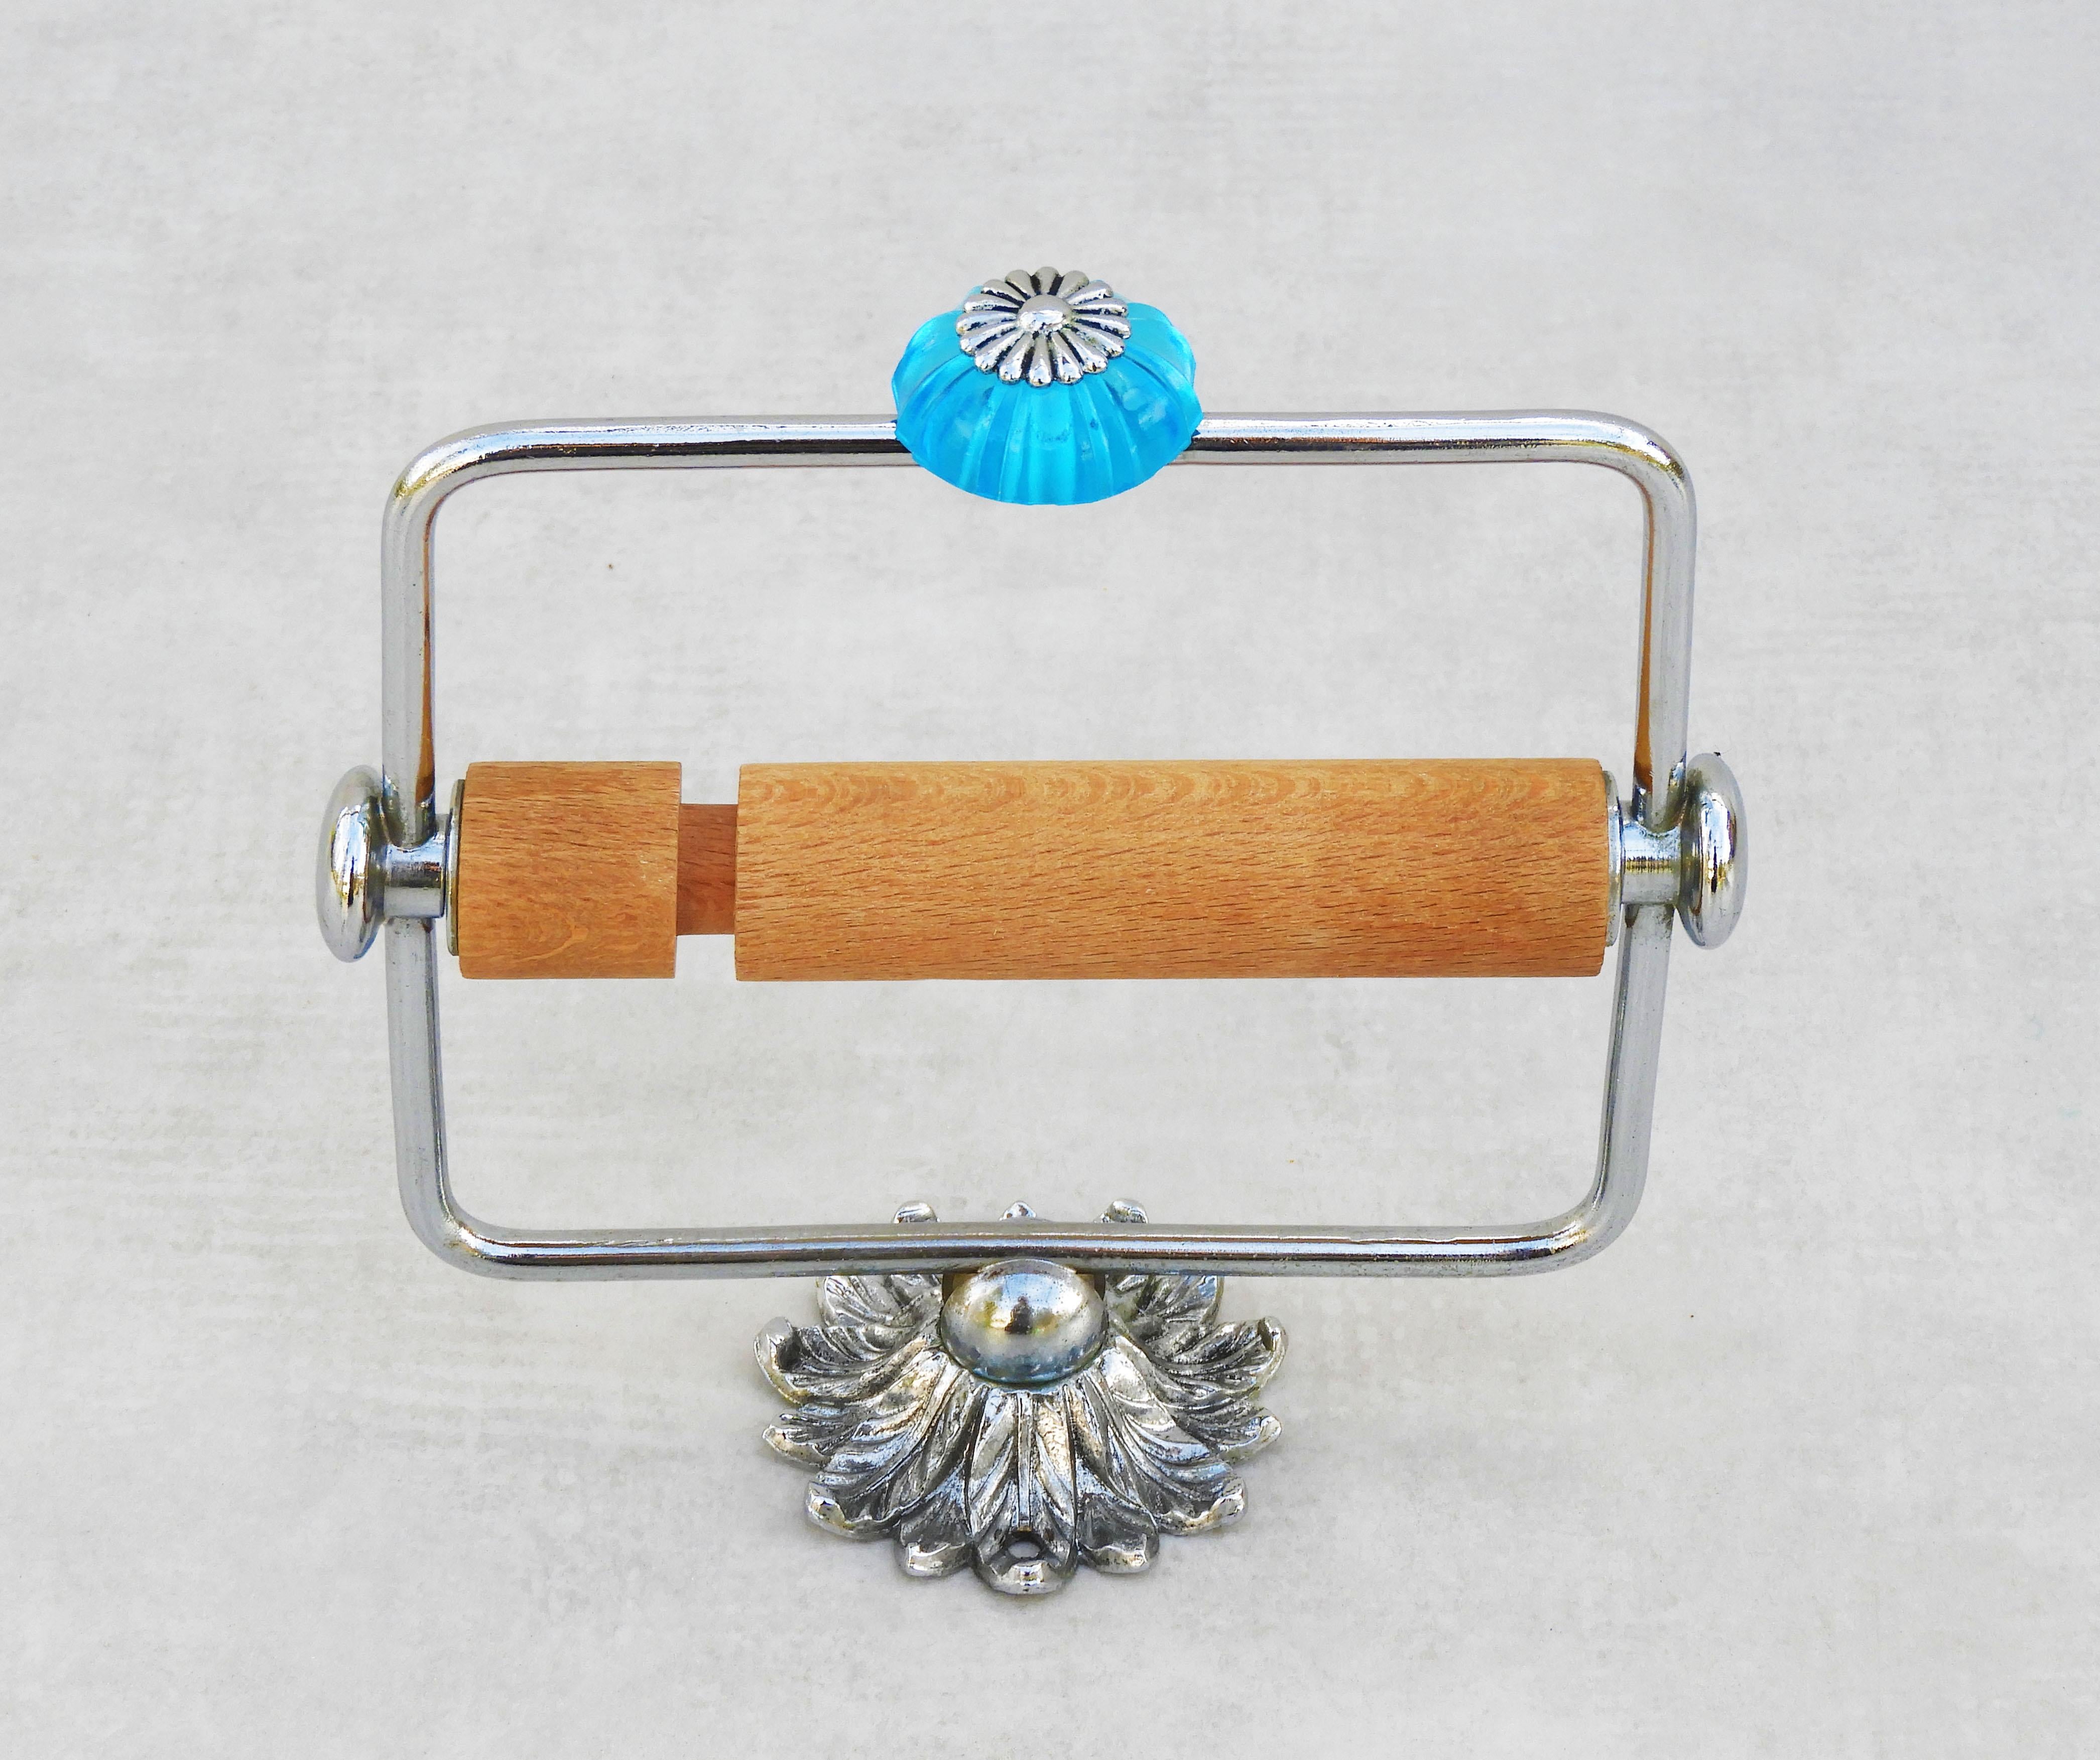 Charming French mid-century toilet paper holder in chrome with blue-faceted glass and daisy flower detailing.   Well-made, good-quality hooks in great vintage condition with only light wear commensurate with age and use and no losses to glass. Part